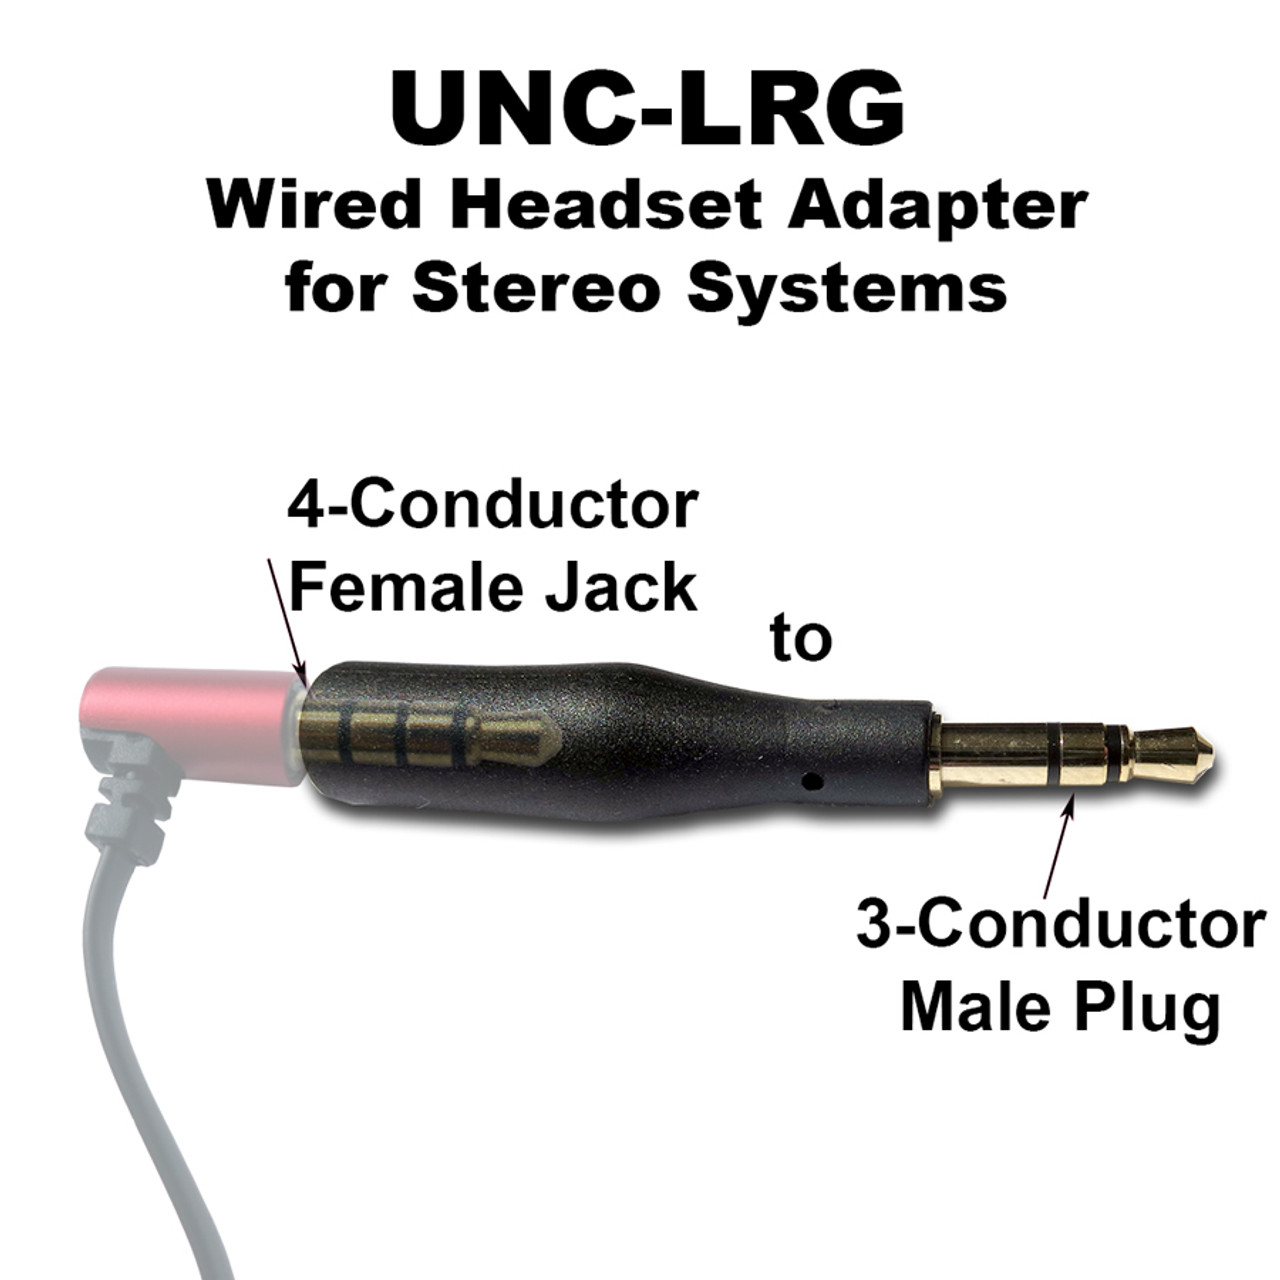 Plug your iPhone Earphone into a Standard 3-Conductor Jack